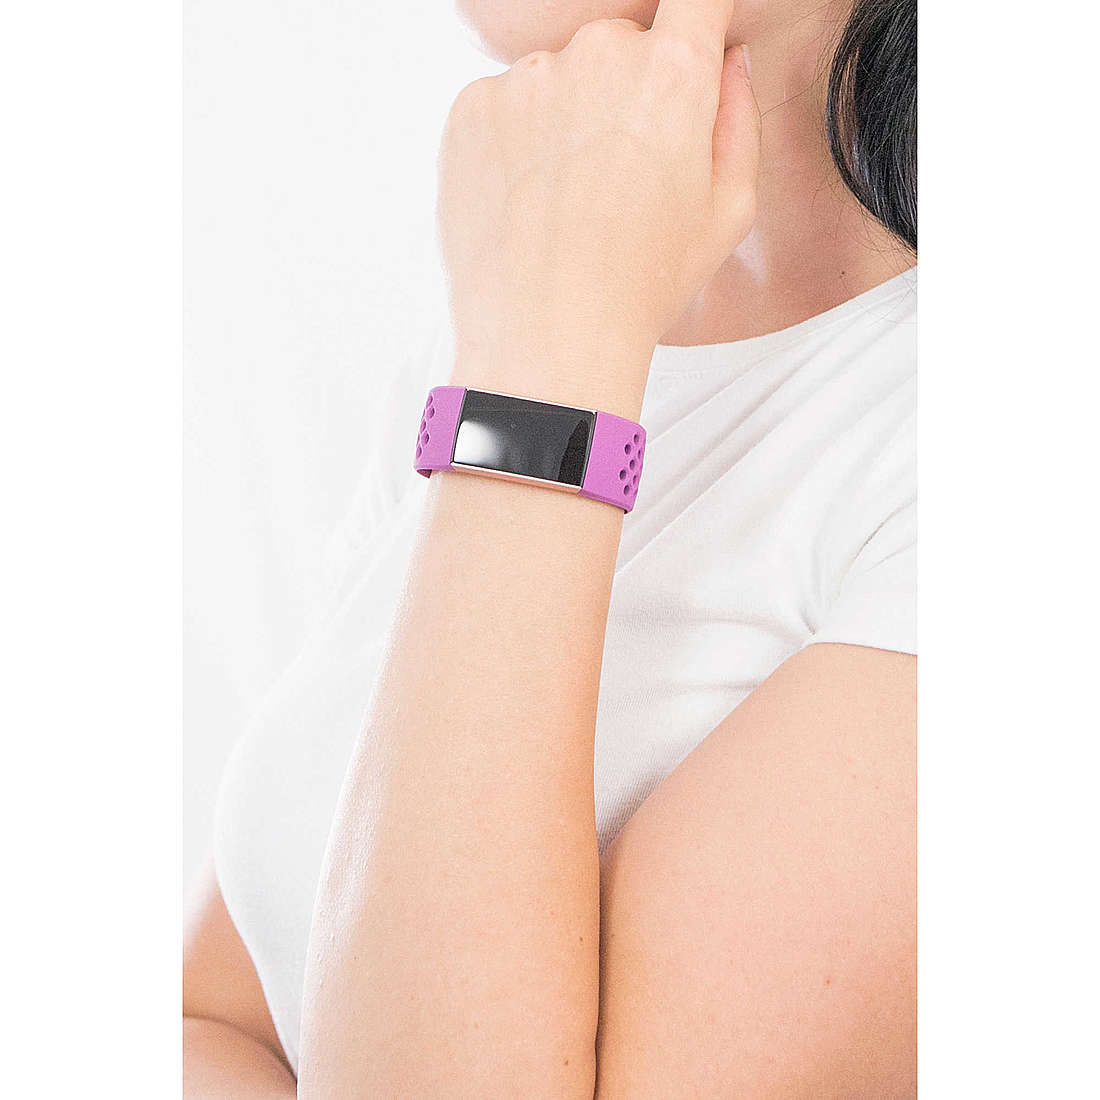 Fitbit digitals Charge woman FB409RGMG wearing